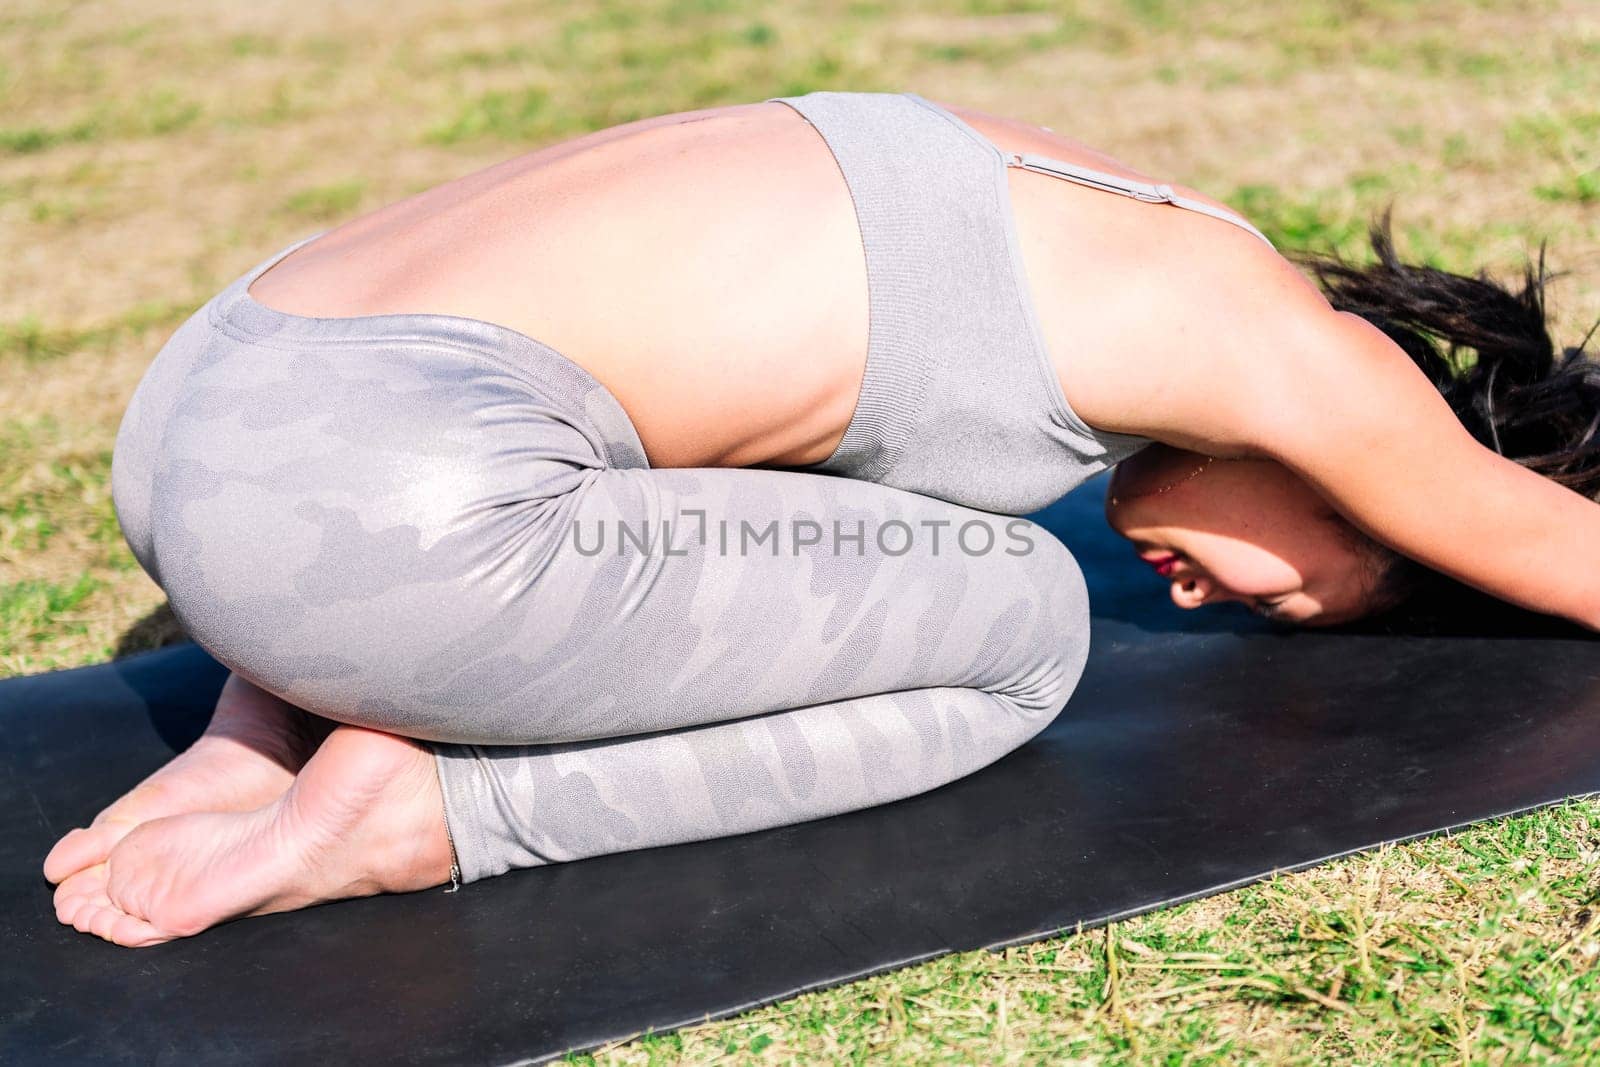 young woman in sportswear kneeling on her yoga mat doing back stretching exercises on the grass in the park, active and healthy lifestyle concept